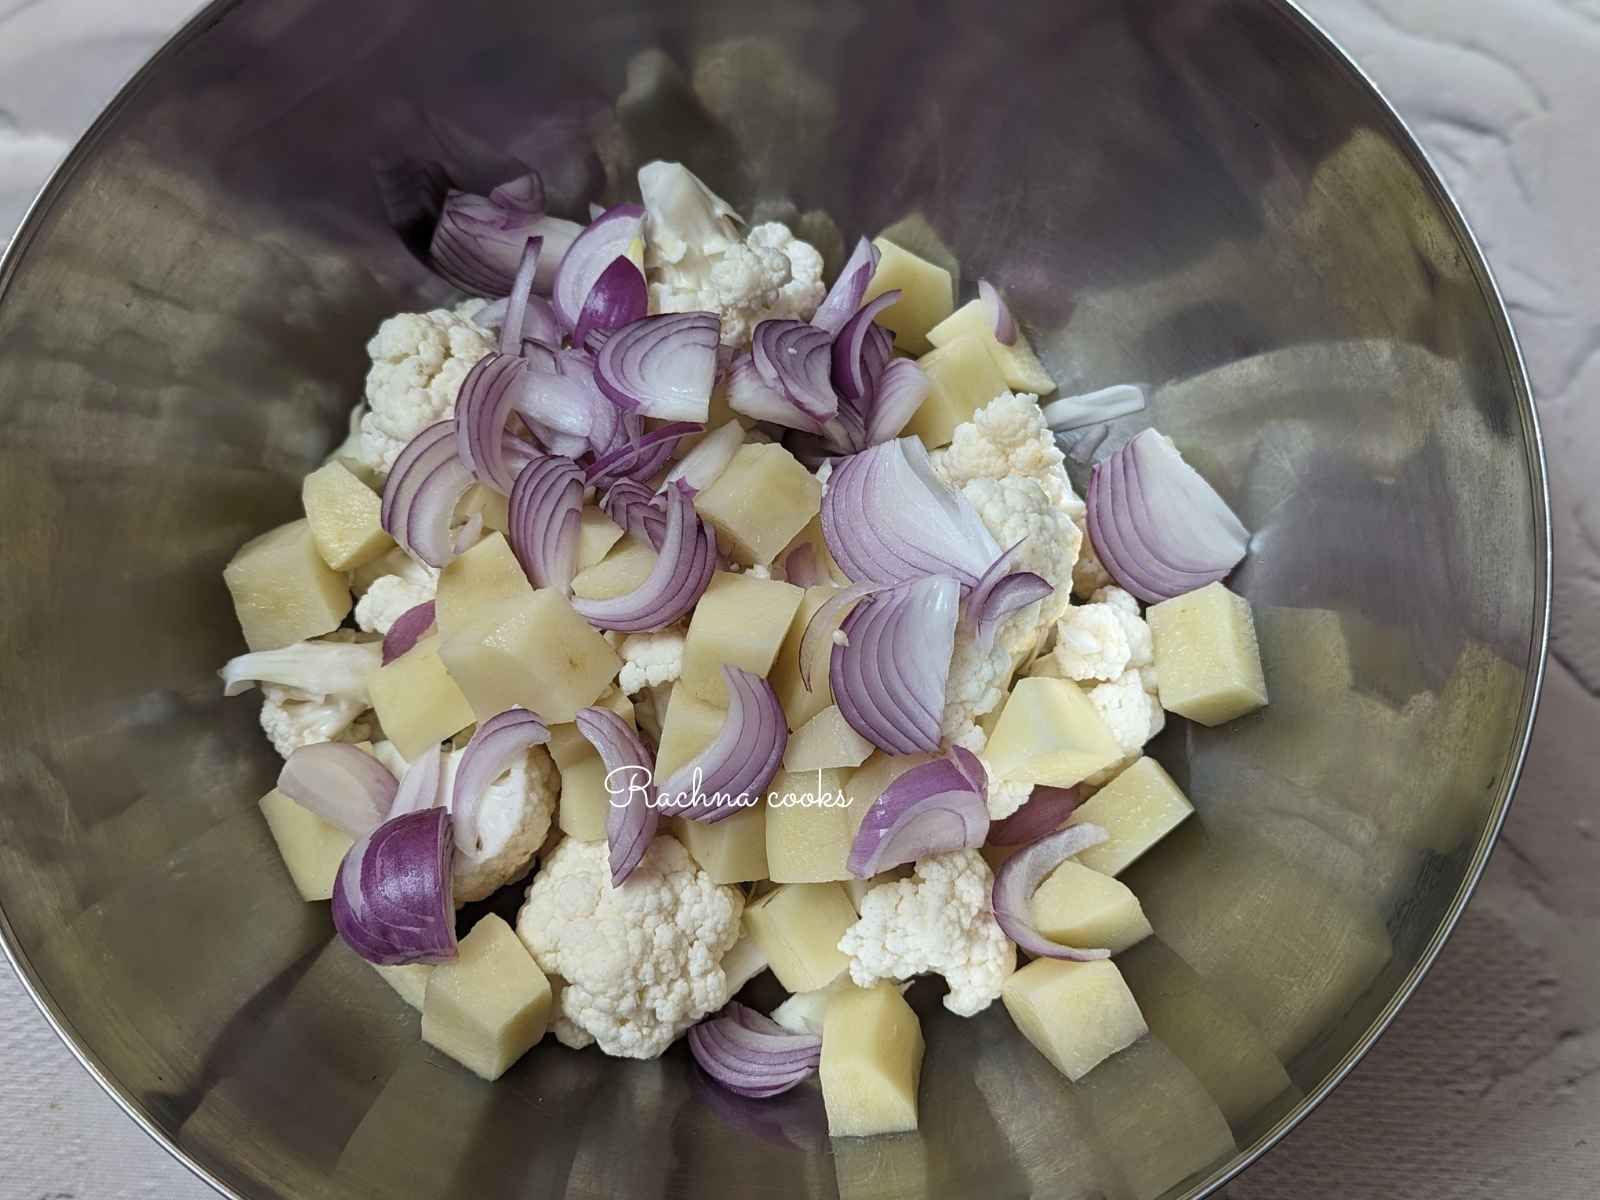 Cauliflower florets, peeled and cubed potatoes and sliced onion in a bowl